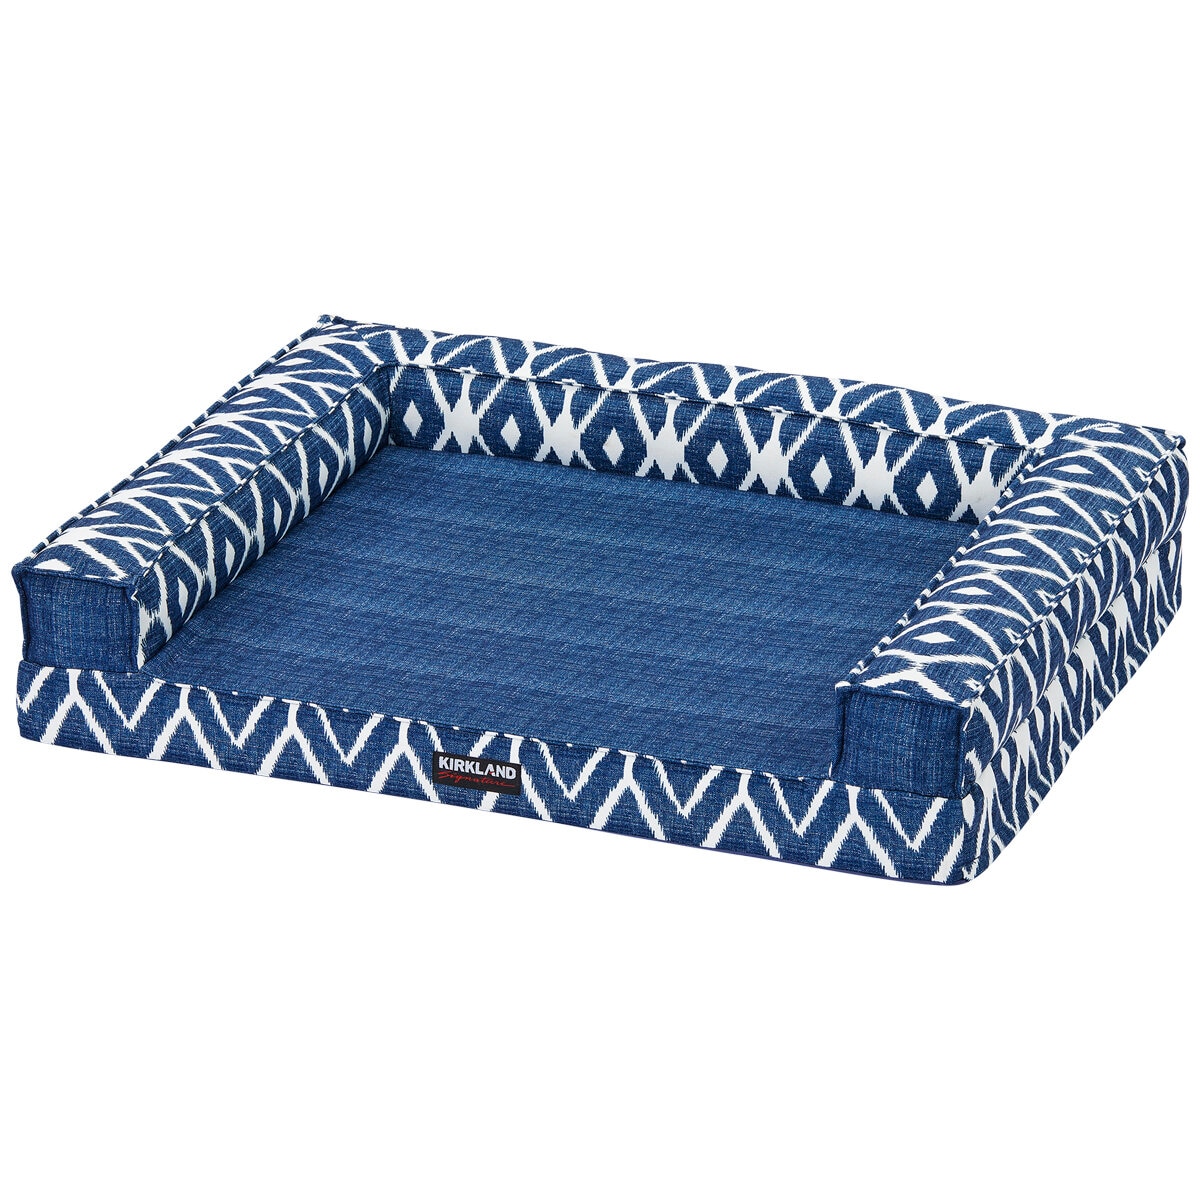 Kirkland Signature Tailored Couch Pet Bed Blue